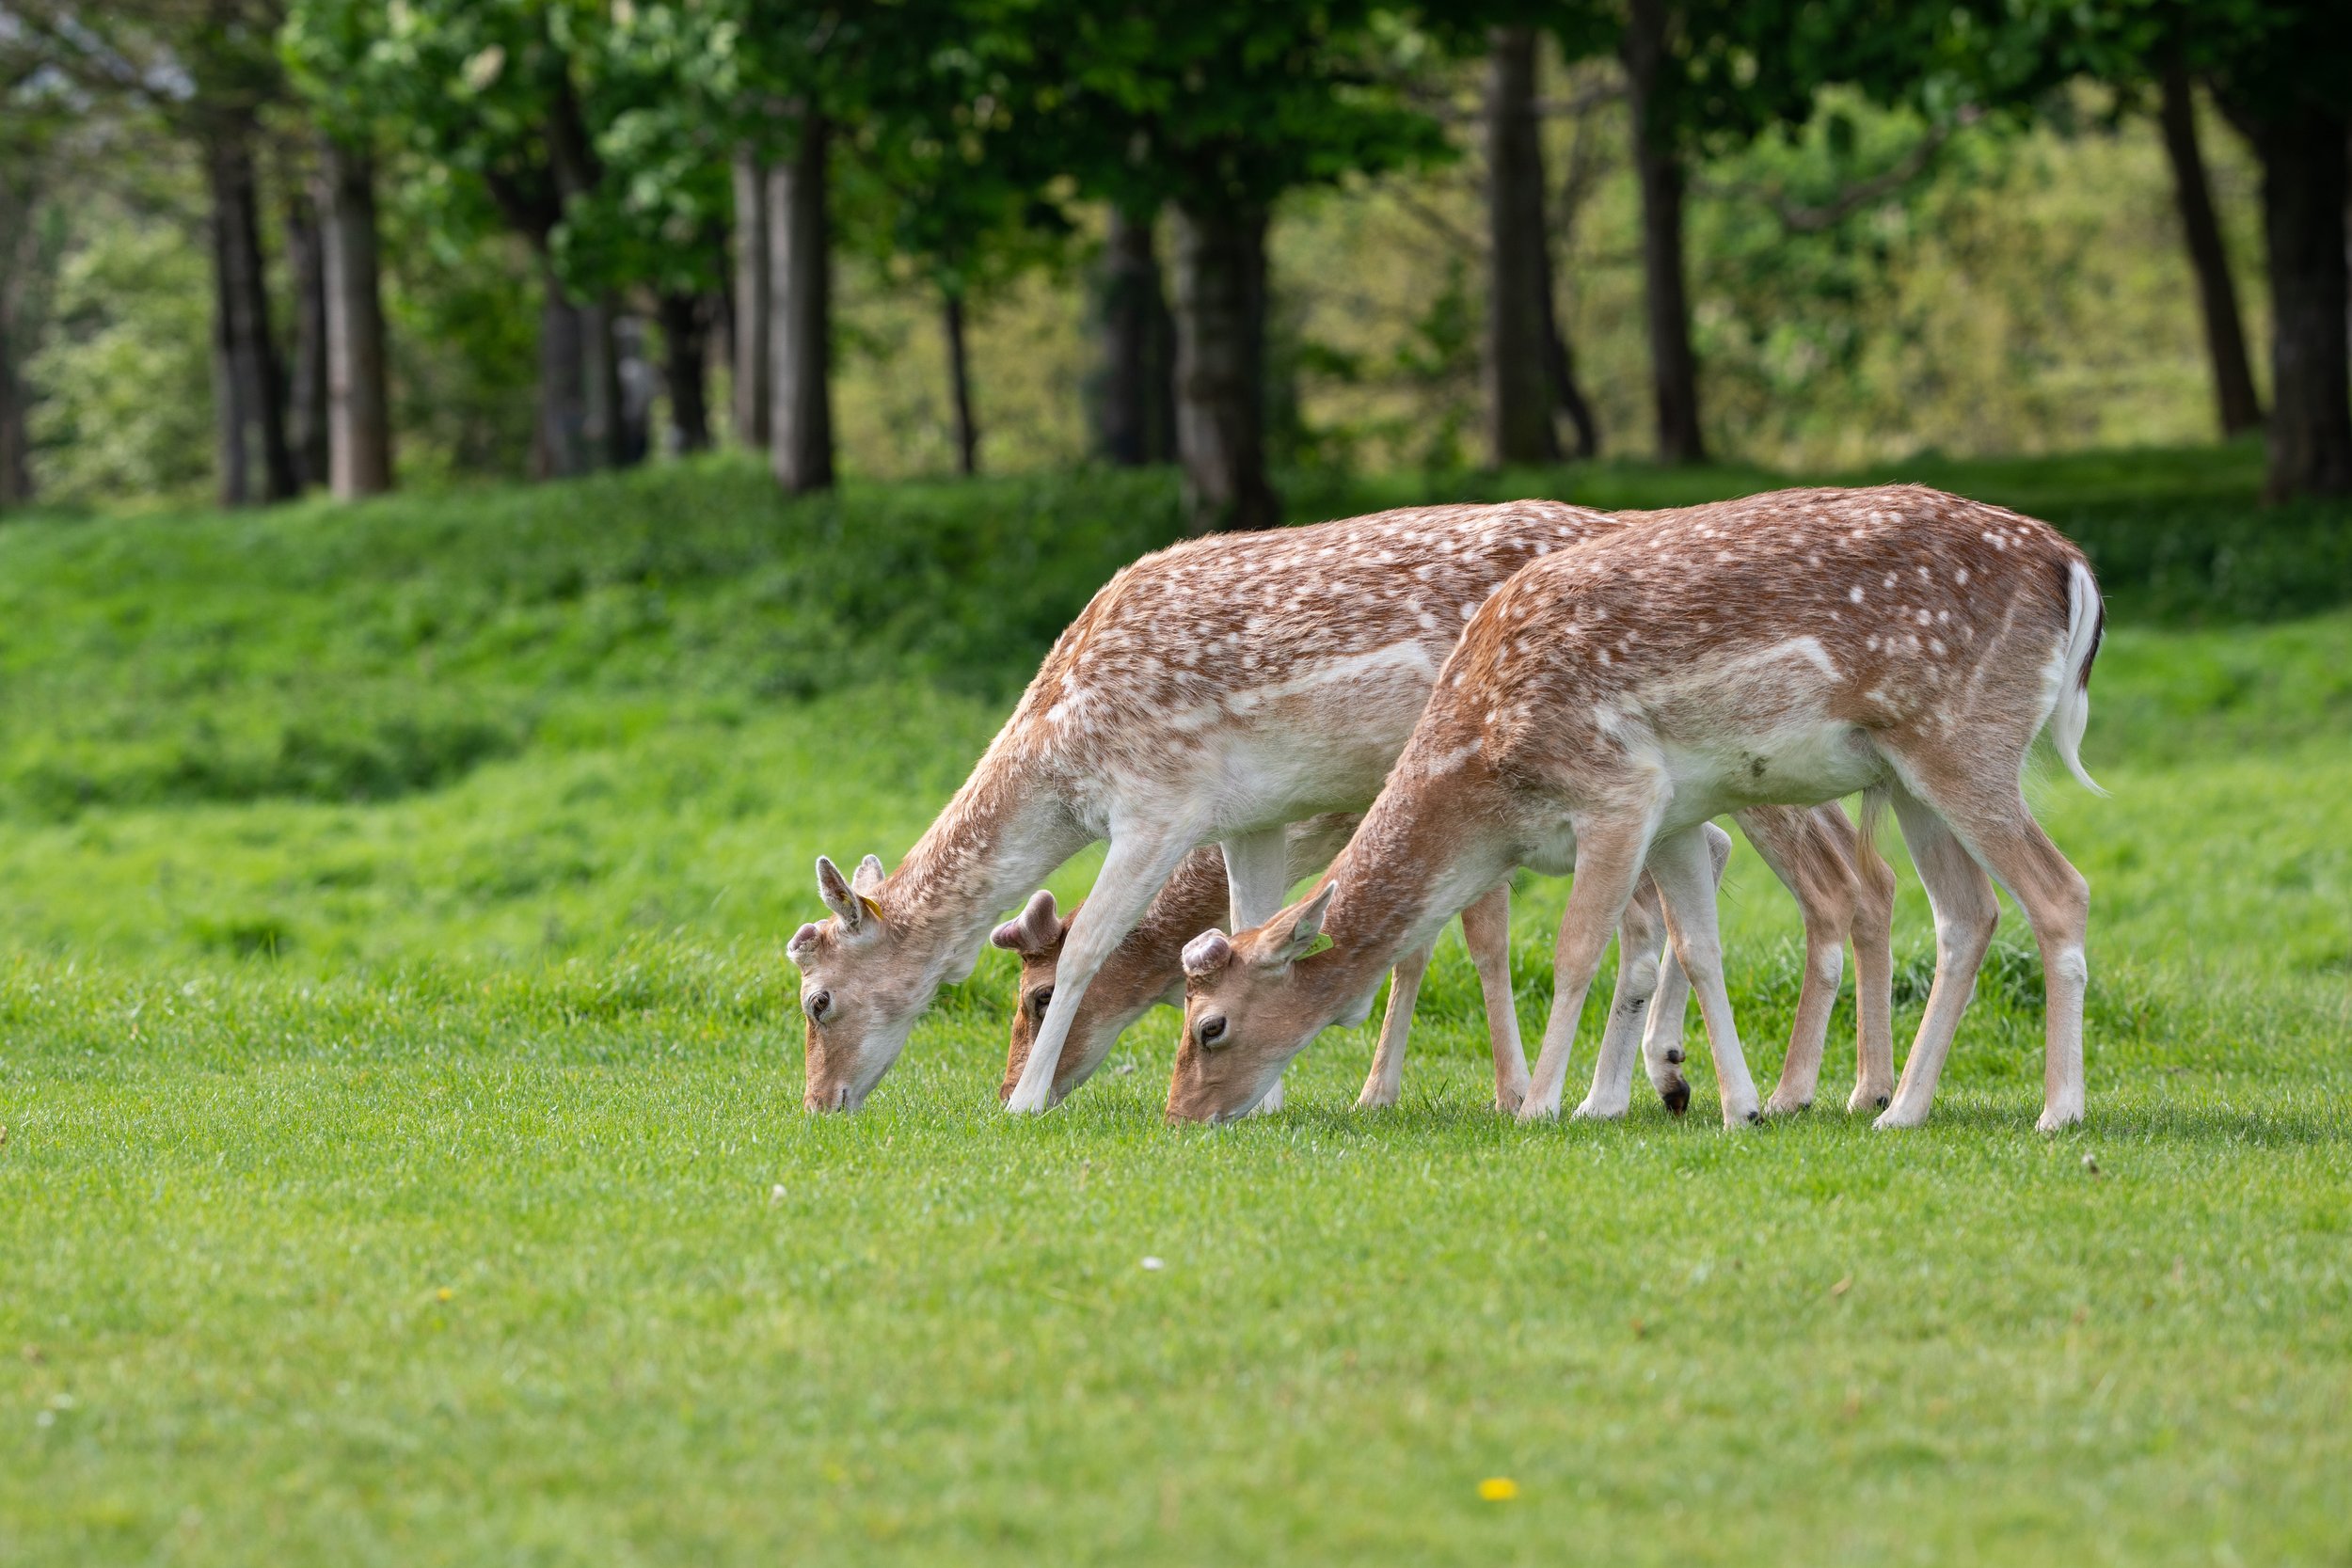 Deer capture with a Canon 5D4 and a Sigma 135mm Art lens.